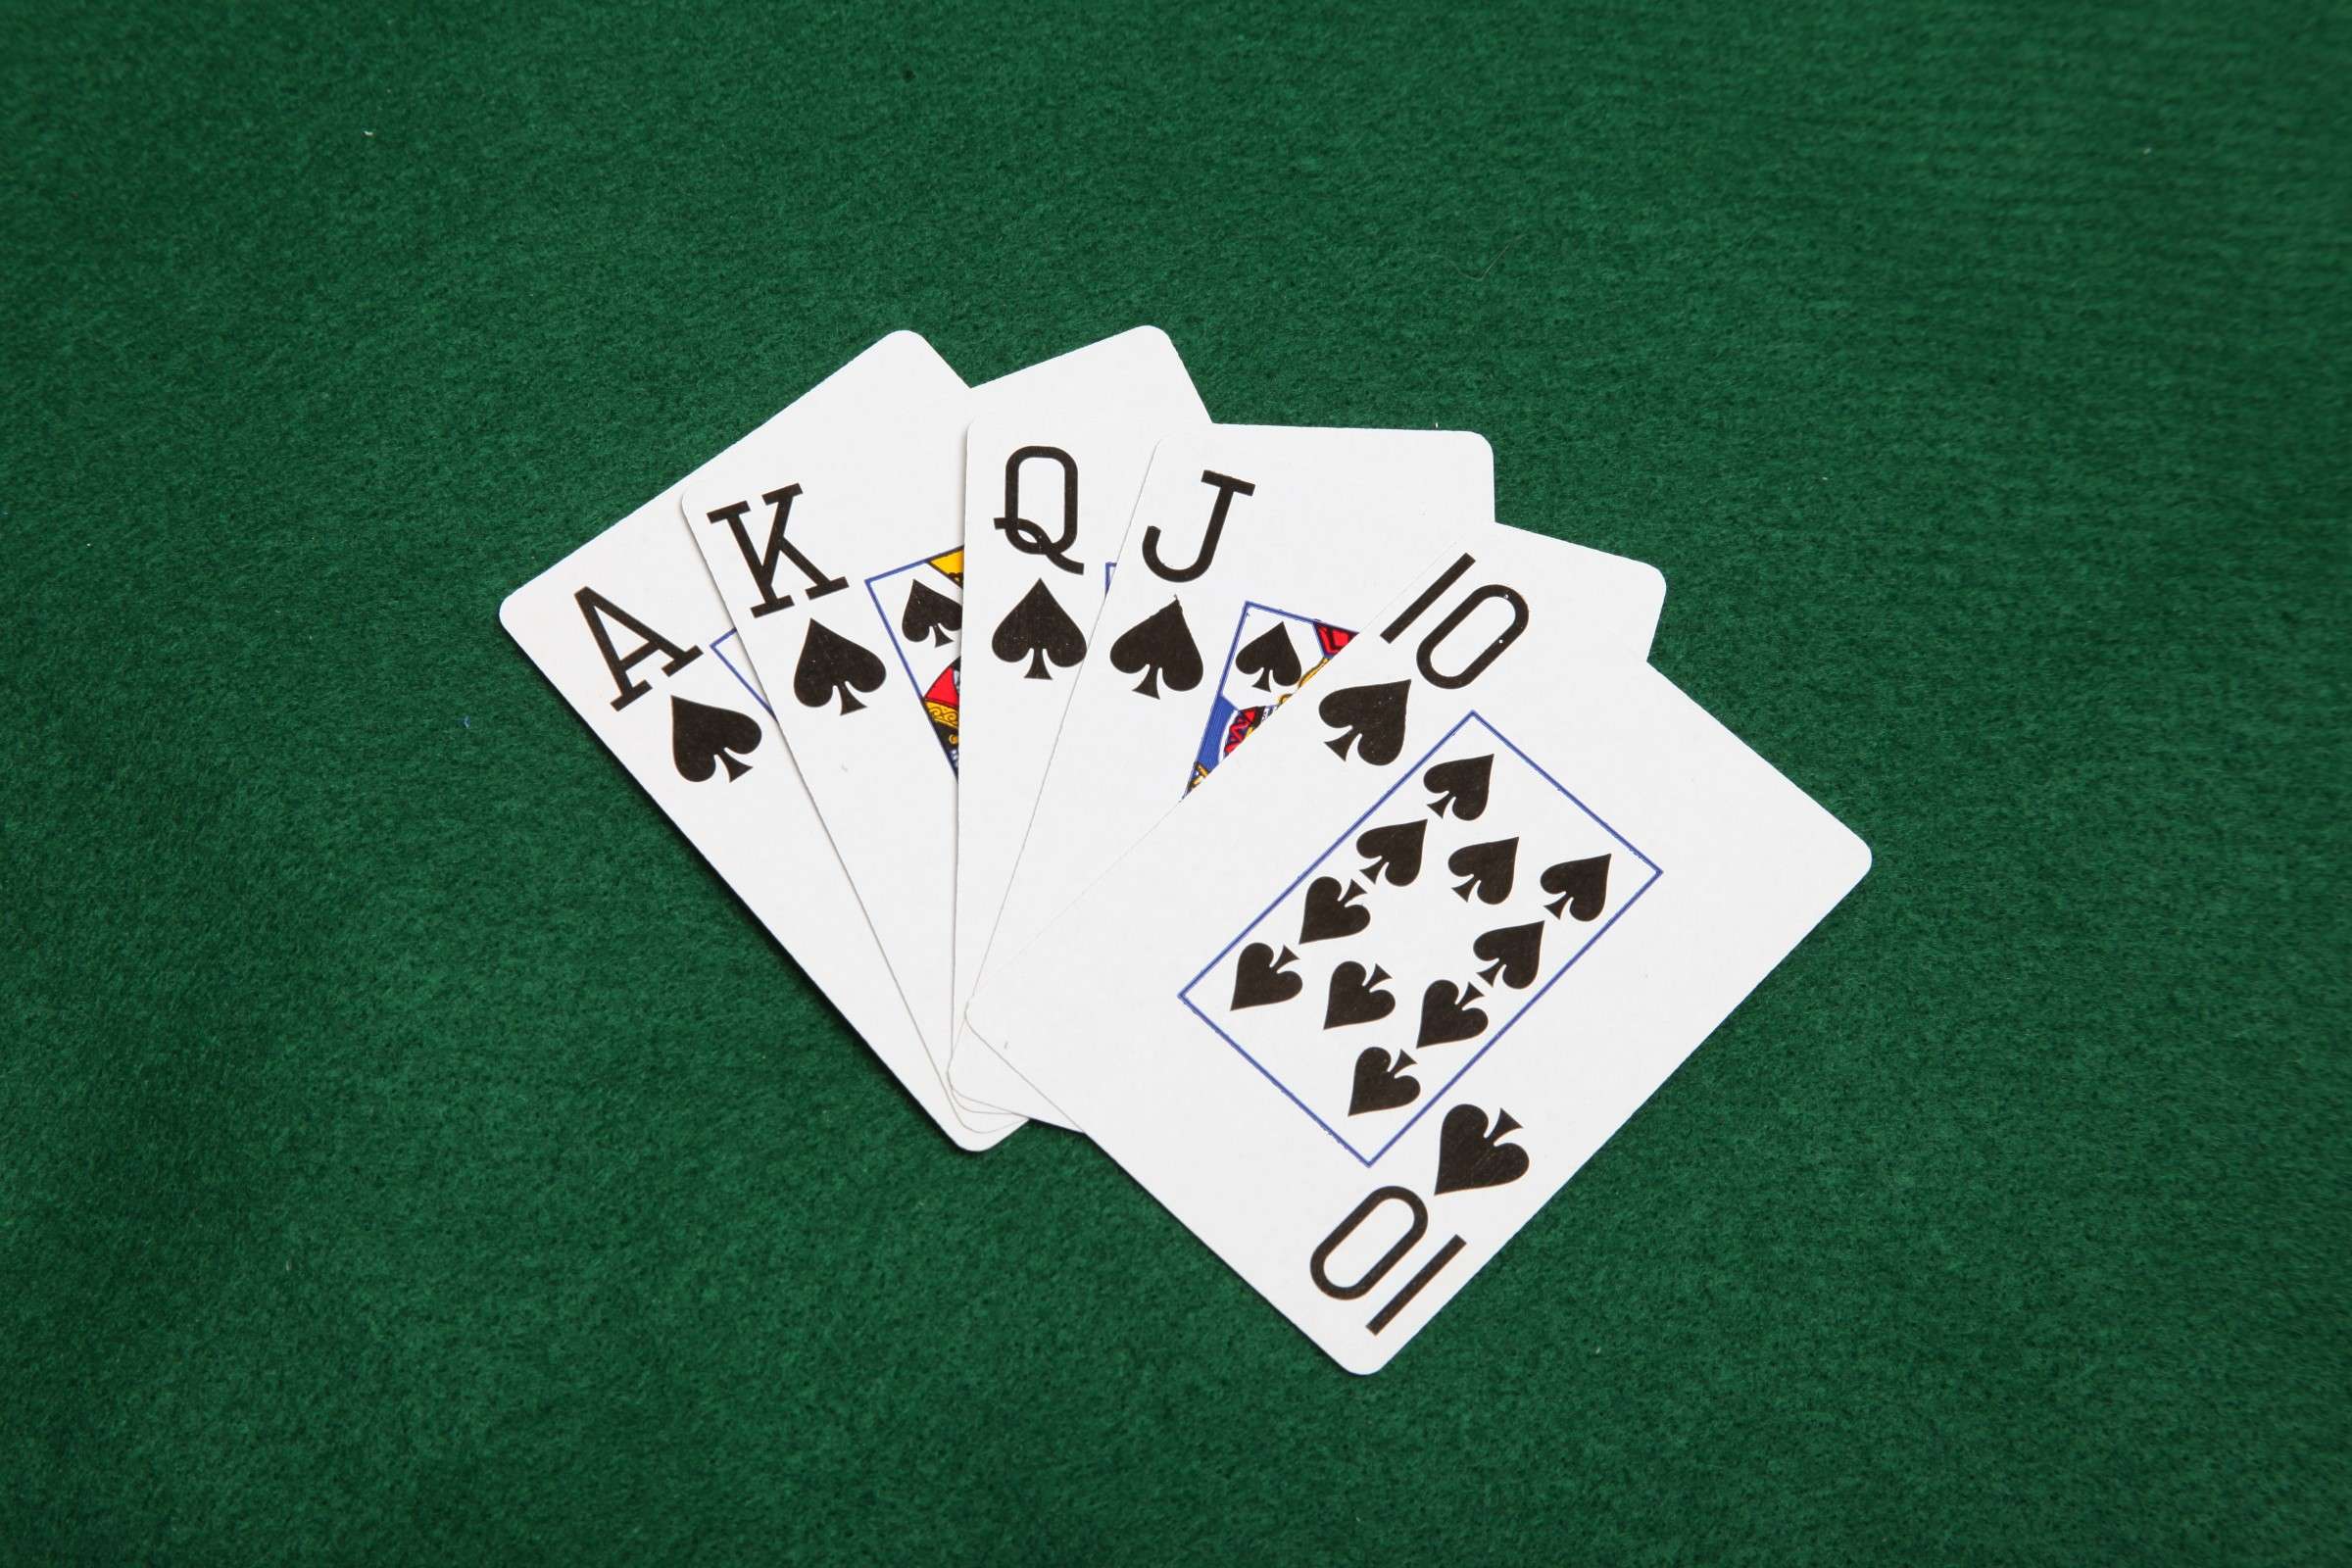 How Does A Straight Work In Poker